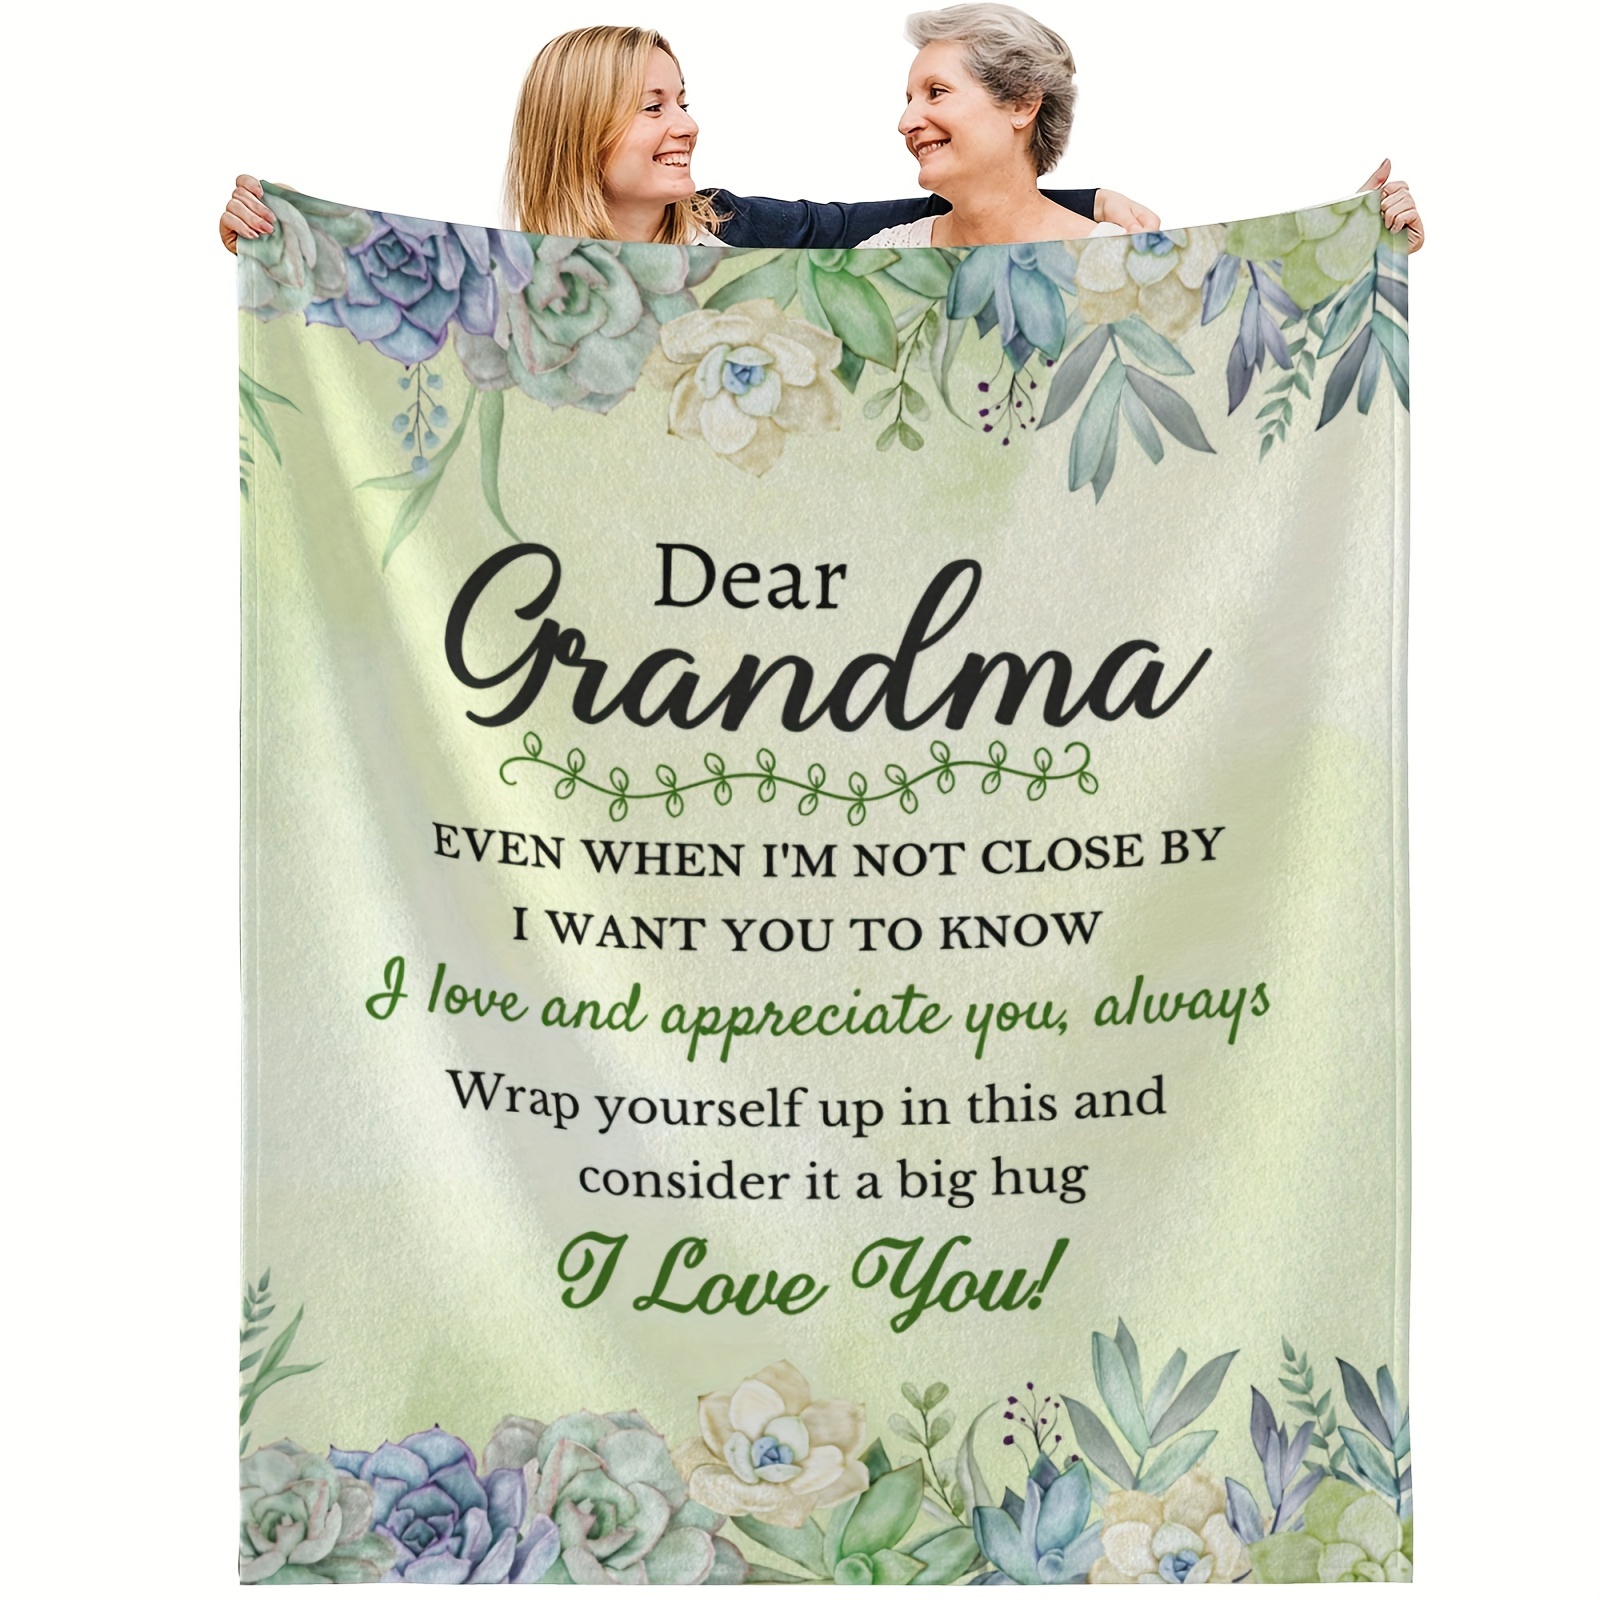 Birthday Grandma Gifts - Gifts For Grandma From Granddaughter, Grandson -  Nana Gifts - Best Grandma Mothers Day Gifts - Grandmother Gift Ideas 